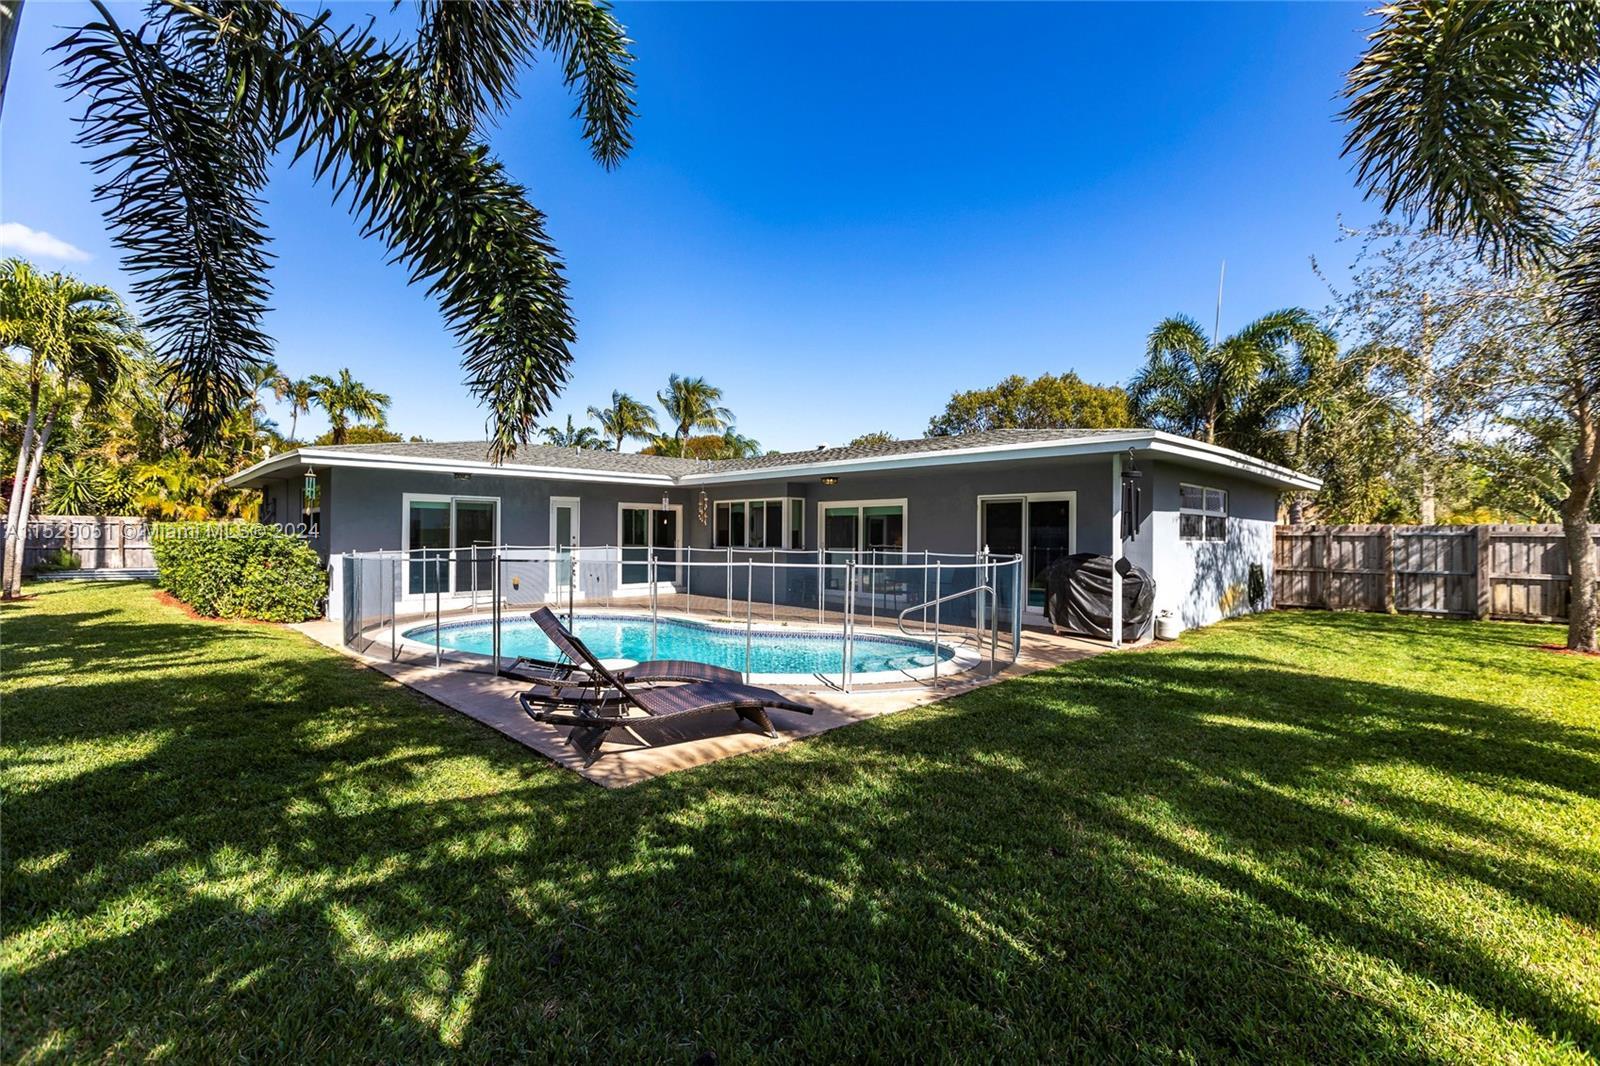 Photo of 5641 NE 22nd Ave in Fort Lauderdale, FL